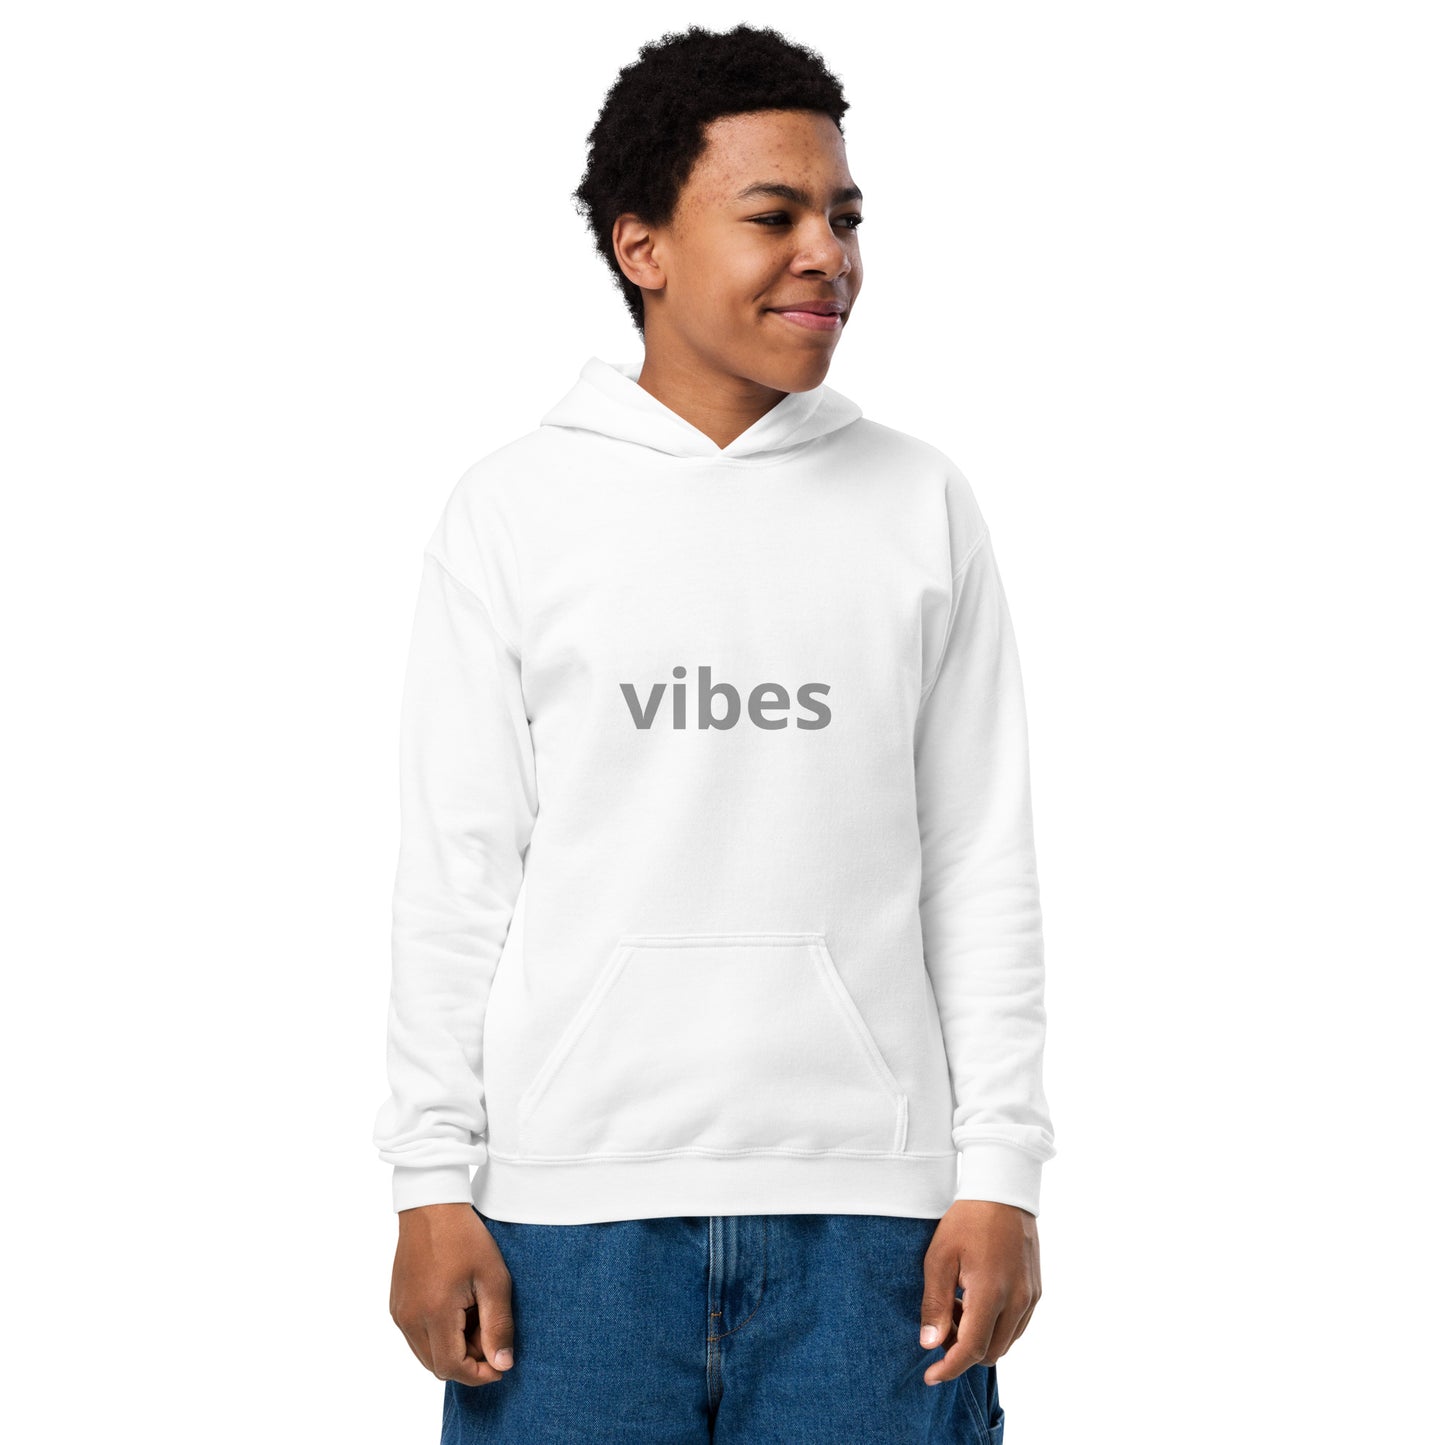 Youth Official God Vibes Hoodie